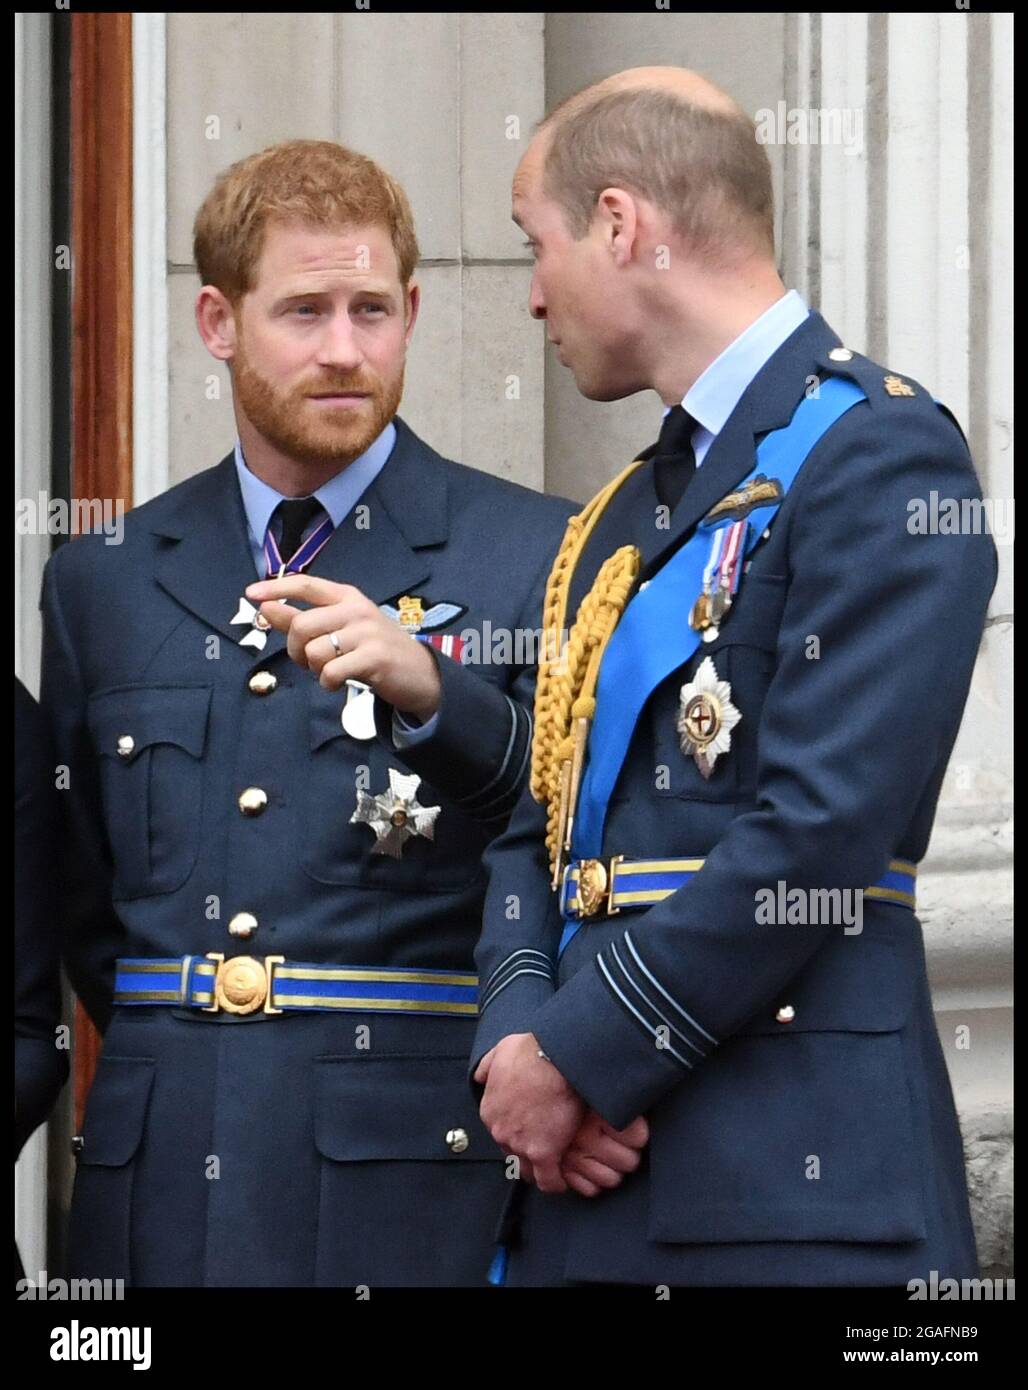 File pictures taken 10072018..Image ©Licensed to Parsons Media. 30/07/2021. London, United Kingdom. Prince William and Prince Harry 100th Anniversary of the RAF. Image ©Licensed to Parsons Media. 10/07/2018. London, United Kingdom. 100th Anniversary of the Royal Air Force. HM The Queen accompanied by Prince William, Duchess of Cambridge and Prince Harry and Duchess of Sussex on the balcony of Buckingham Palace to Mark 100 years of the RAF. Picture by Andrew Parsons / Parsons Media Stock Photo